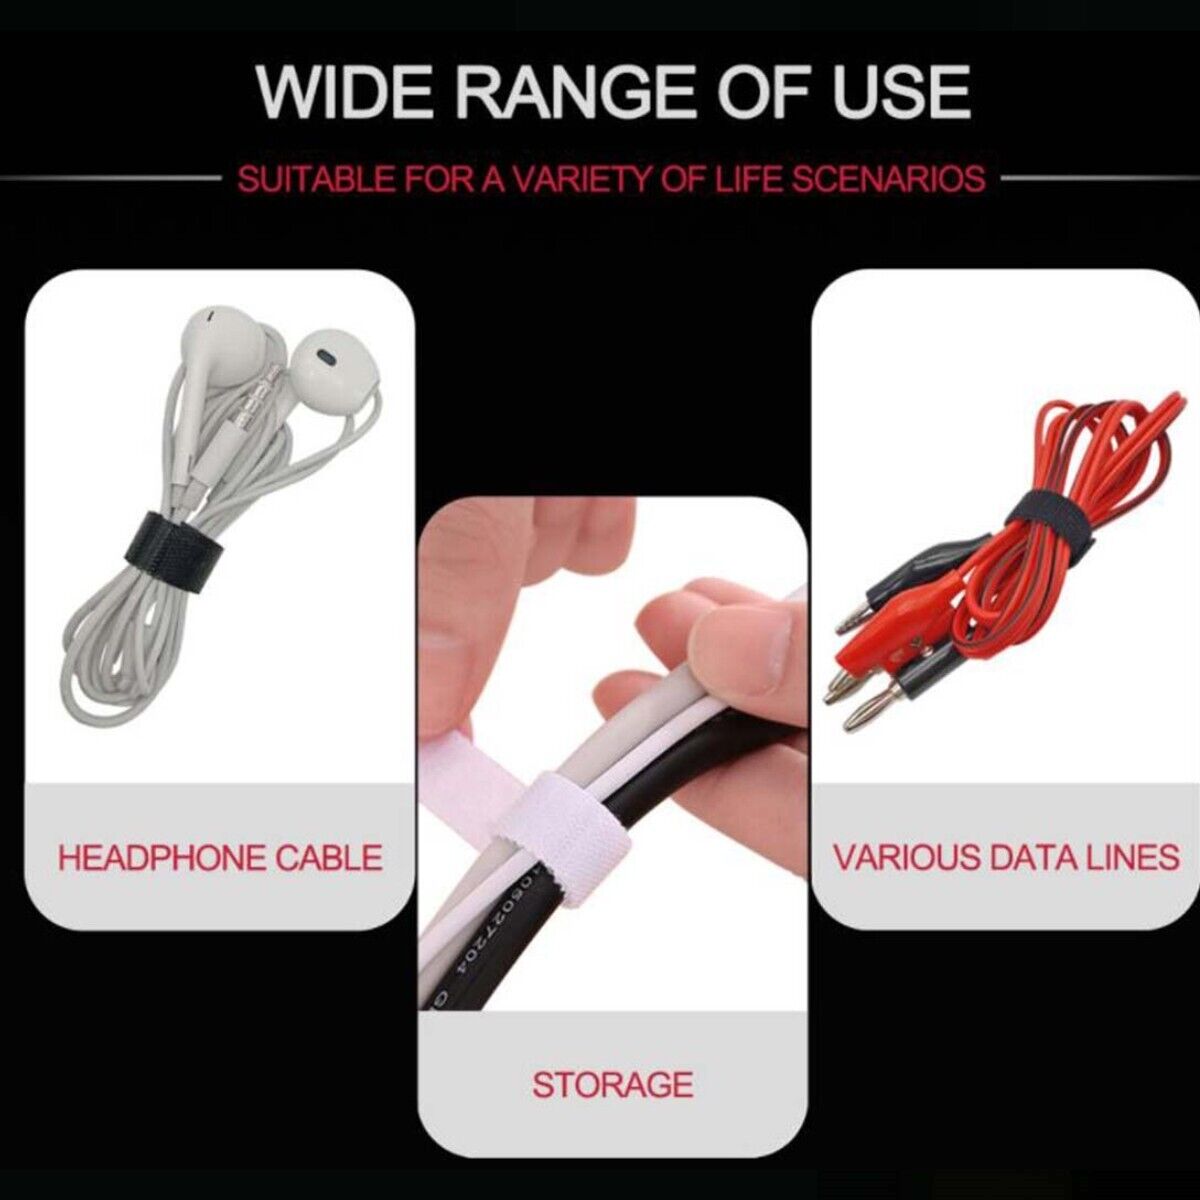 Mini Handheld Vacuum Cleaner with Wireless and USB Rechargeable Features - Car and Home Cleaning